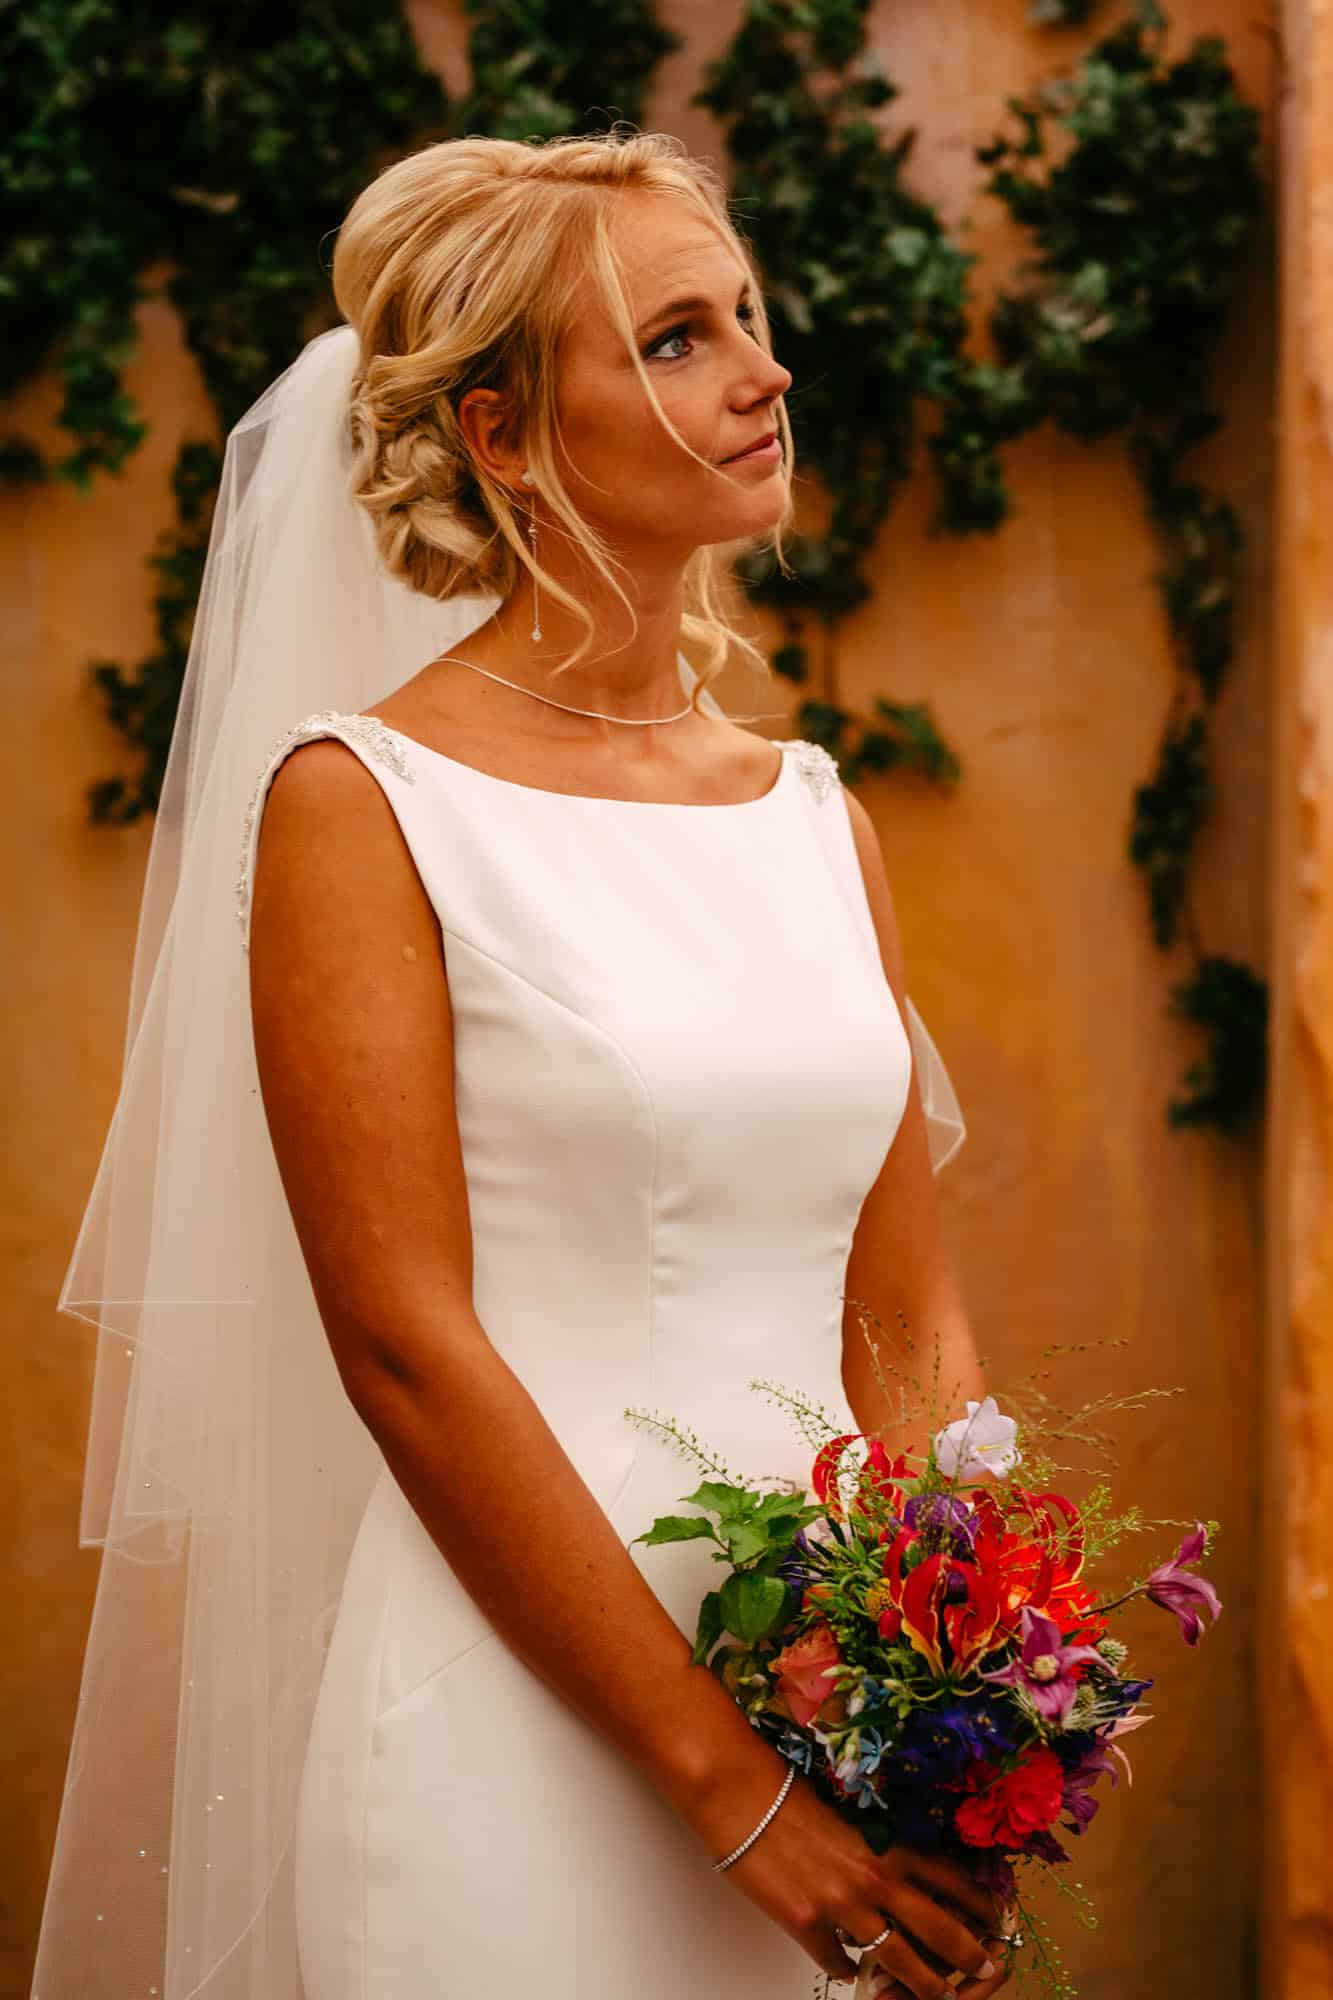 A bride in a white wedding dress with a bouquet.